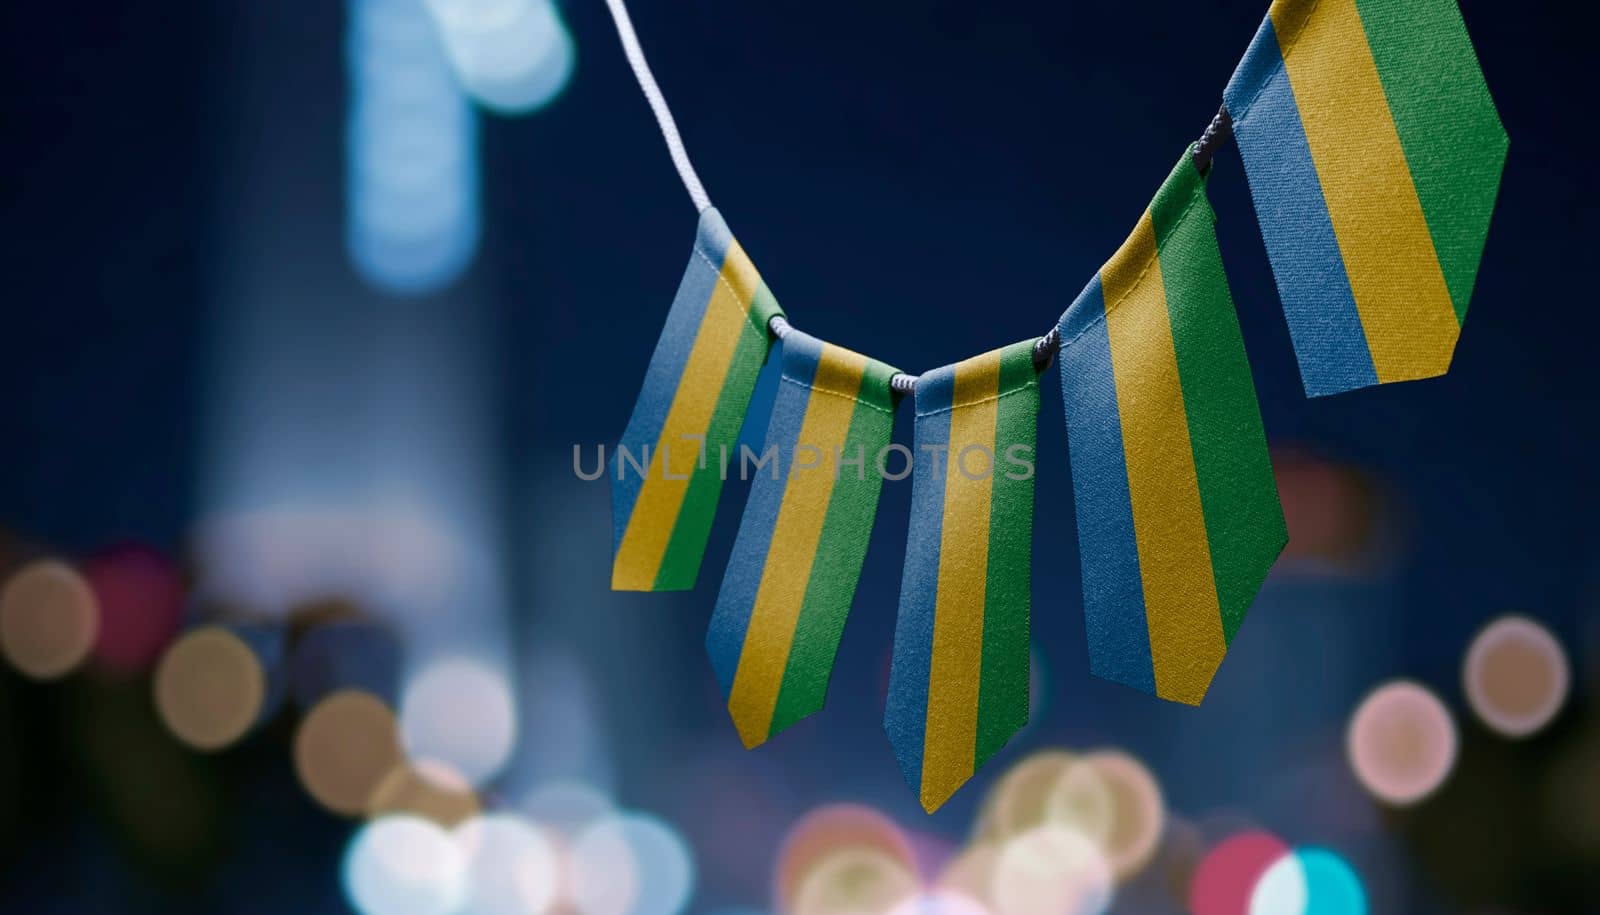 A garland of Gabon national flags on an abstract blurred background by butenkow